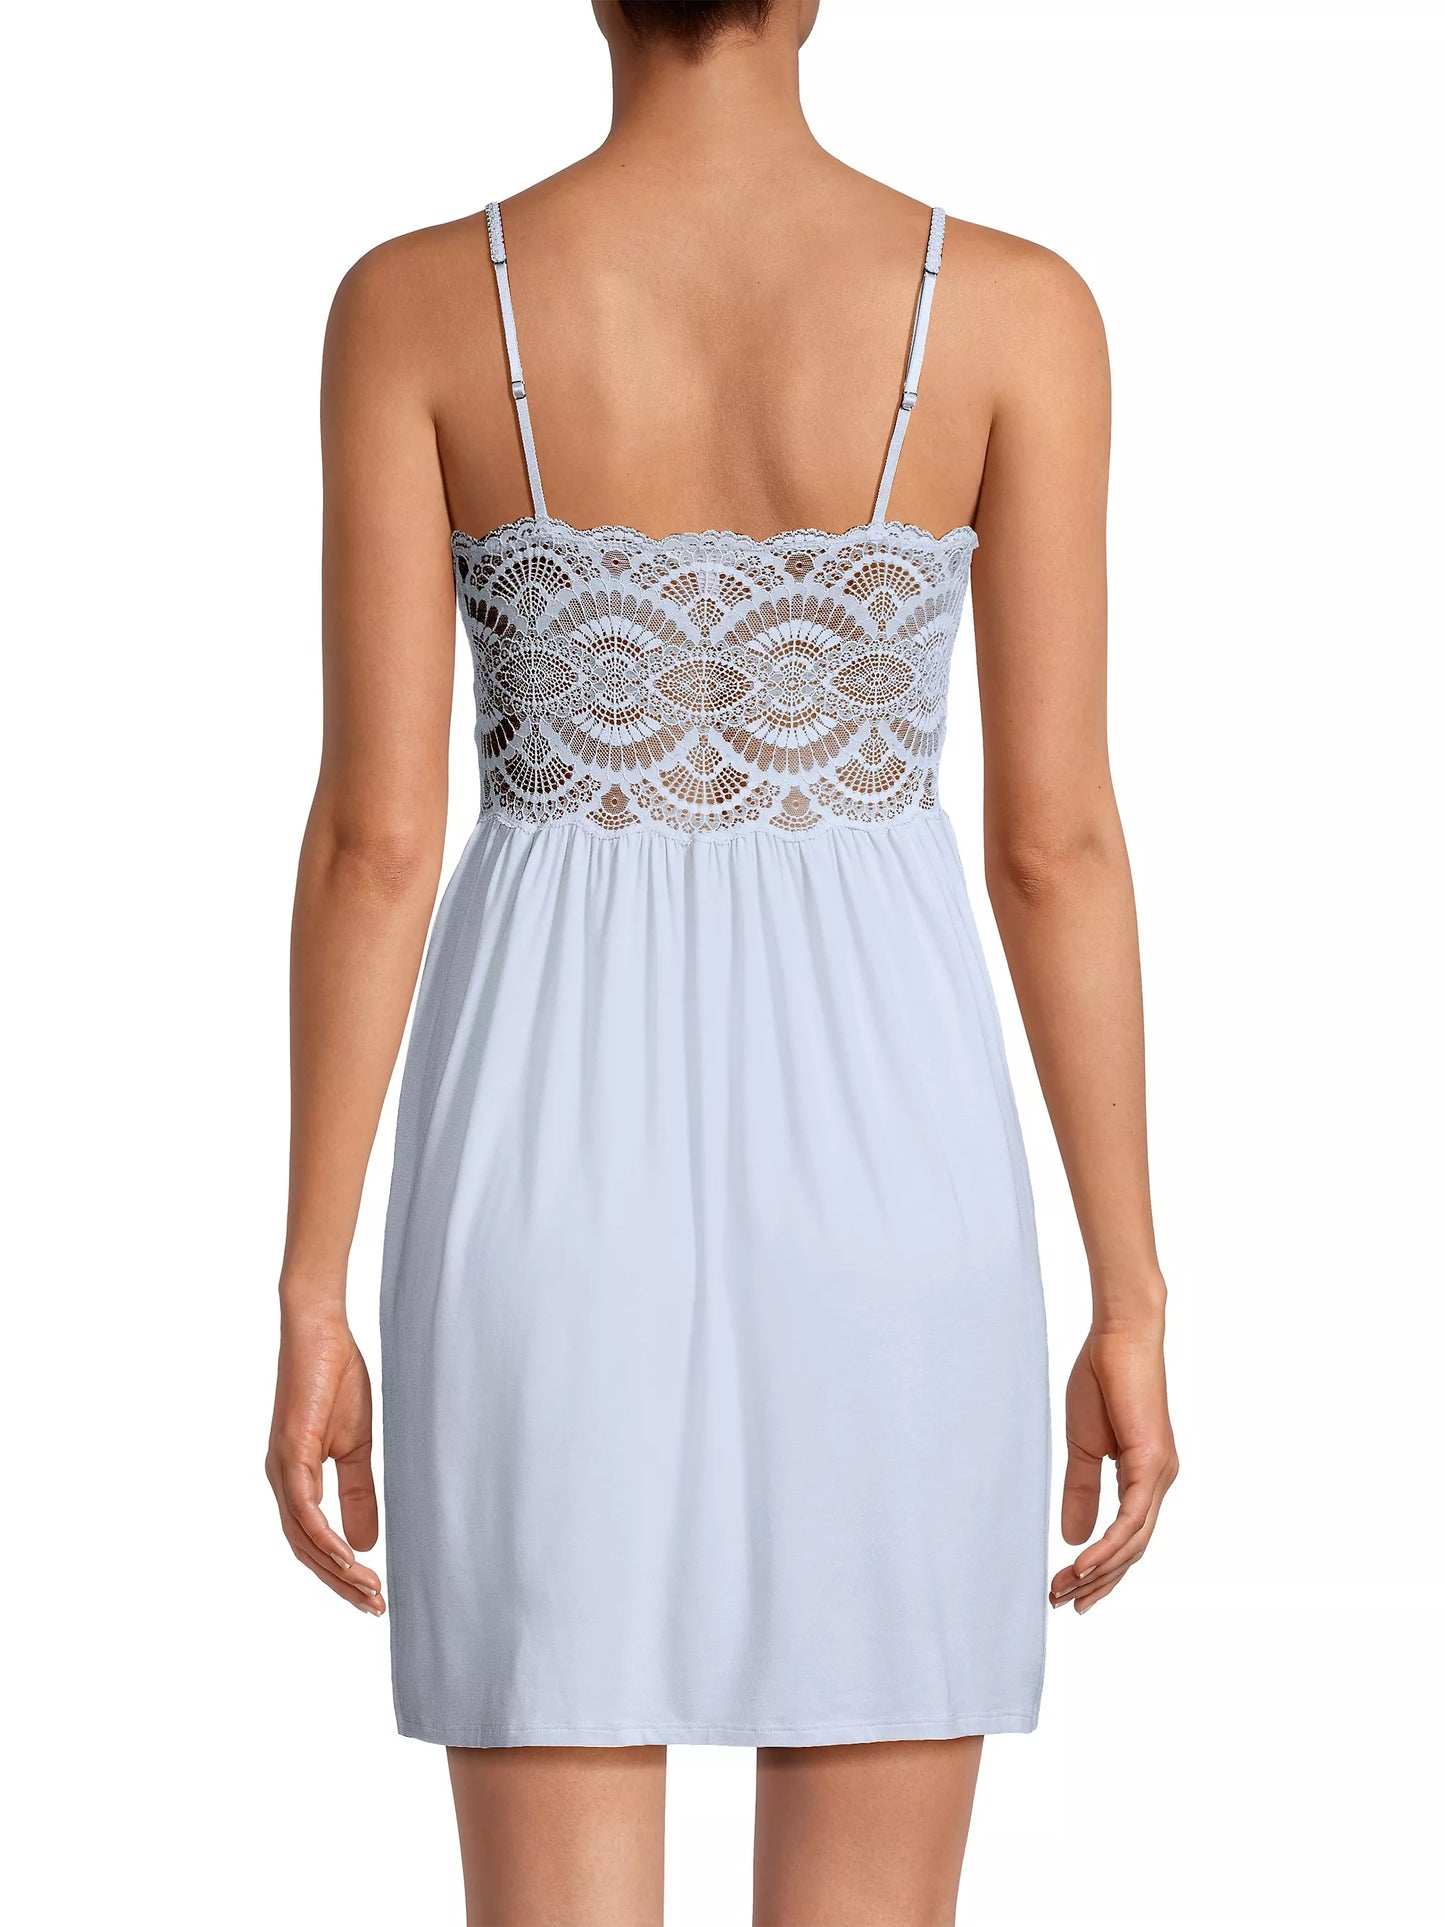 Mariana Chemise with Lace in Ice Blue, available at LaSource in Darien.